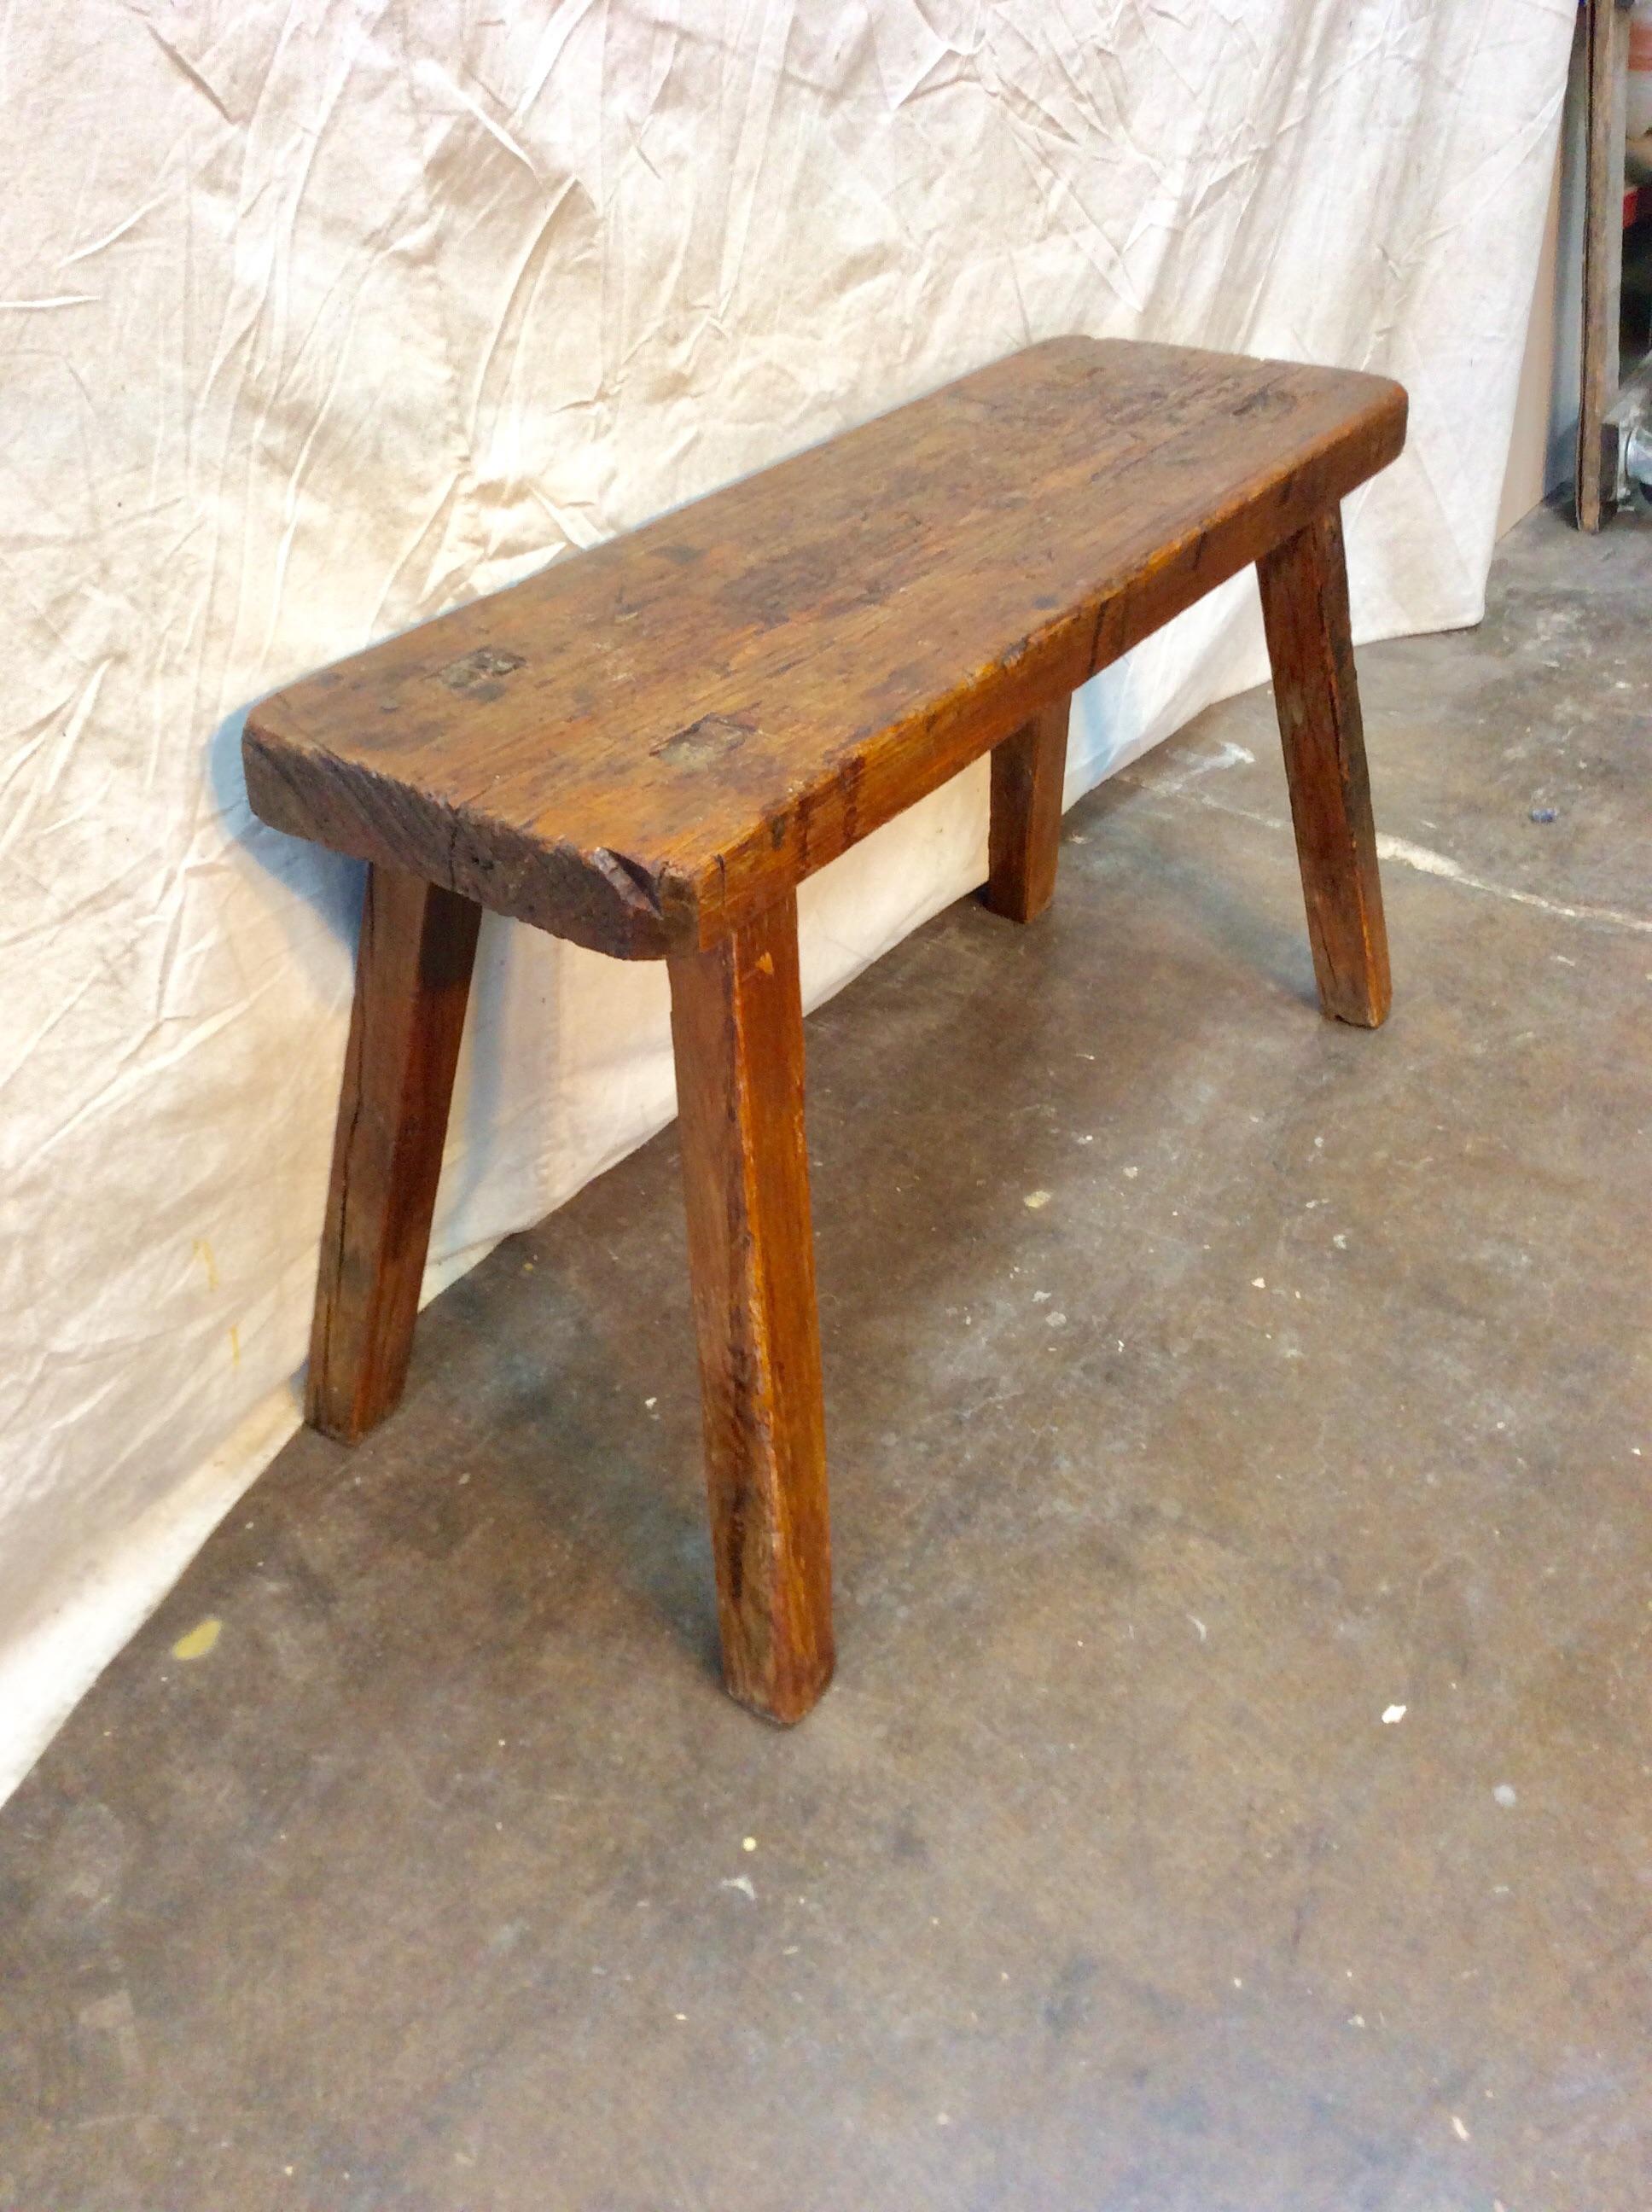 This 19th century carpenters bench from England is large enough to serve as a narrow coffee table. The bench features mortise and tenon construction on a 2